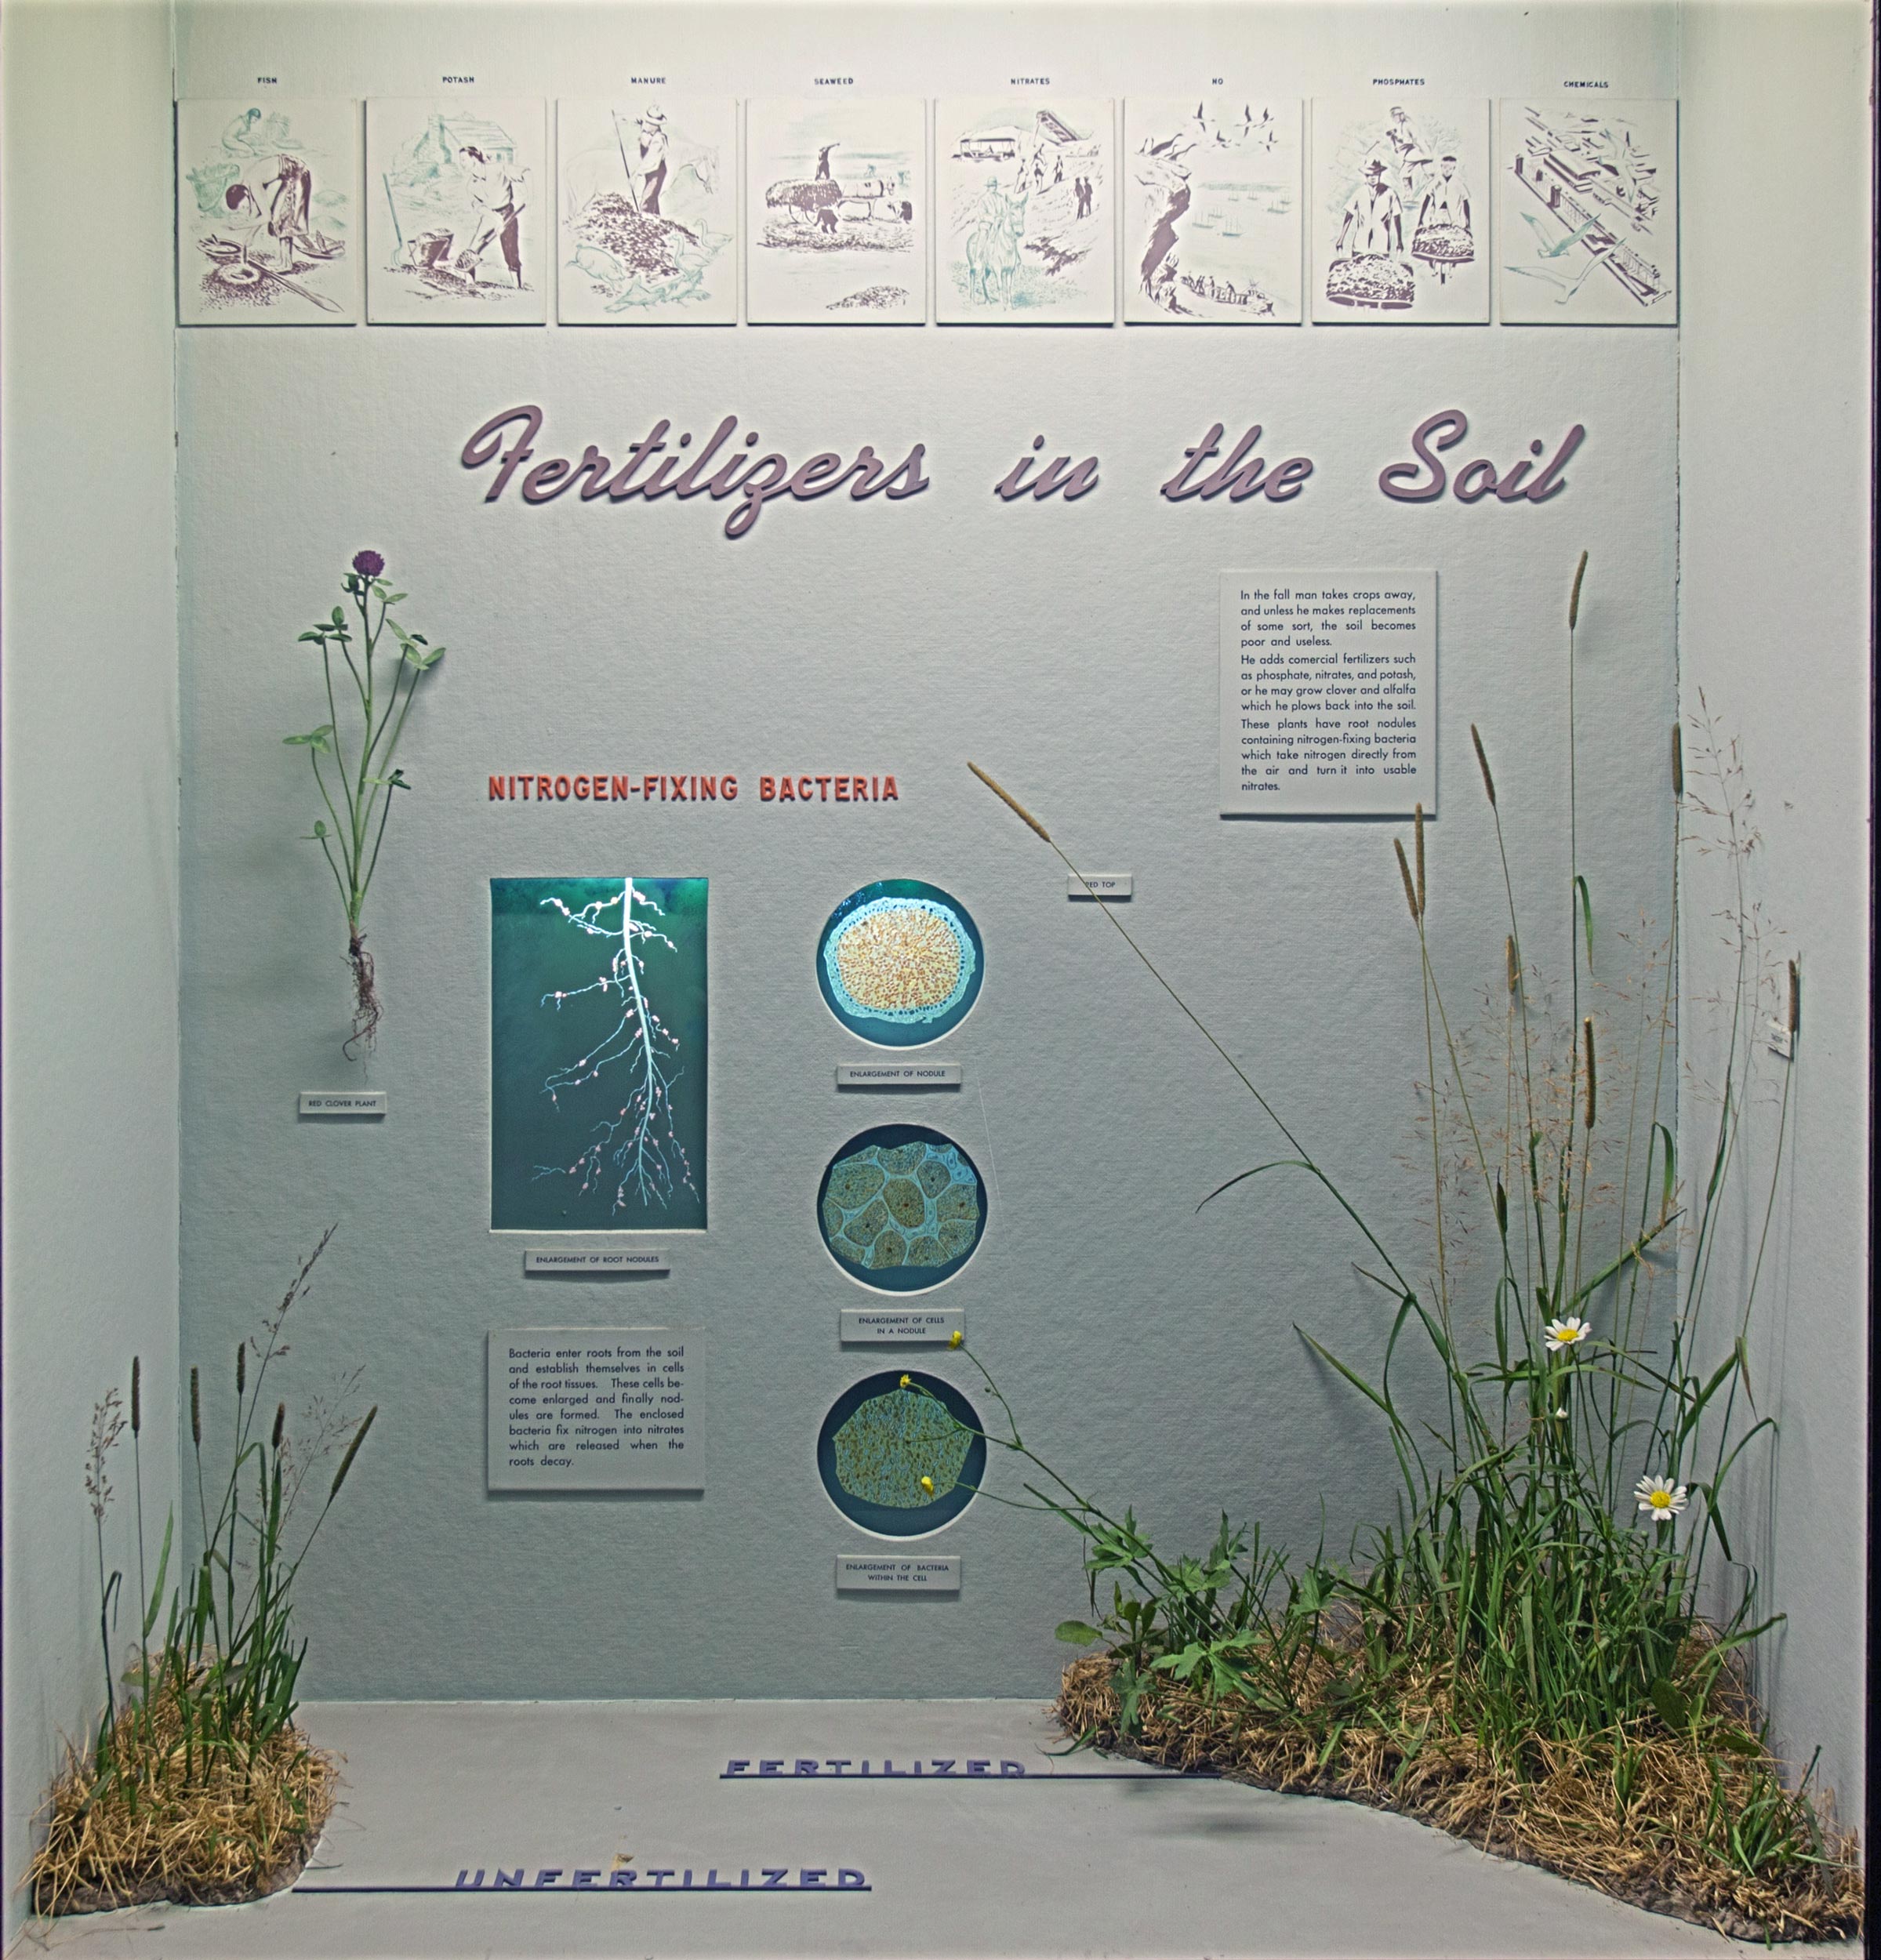 Museum case showing illustrations, diagrams and models of the fertilizers in the soil and their effects in vegetation.